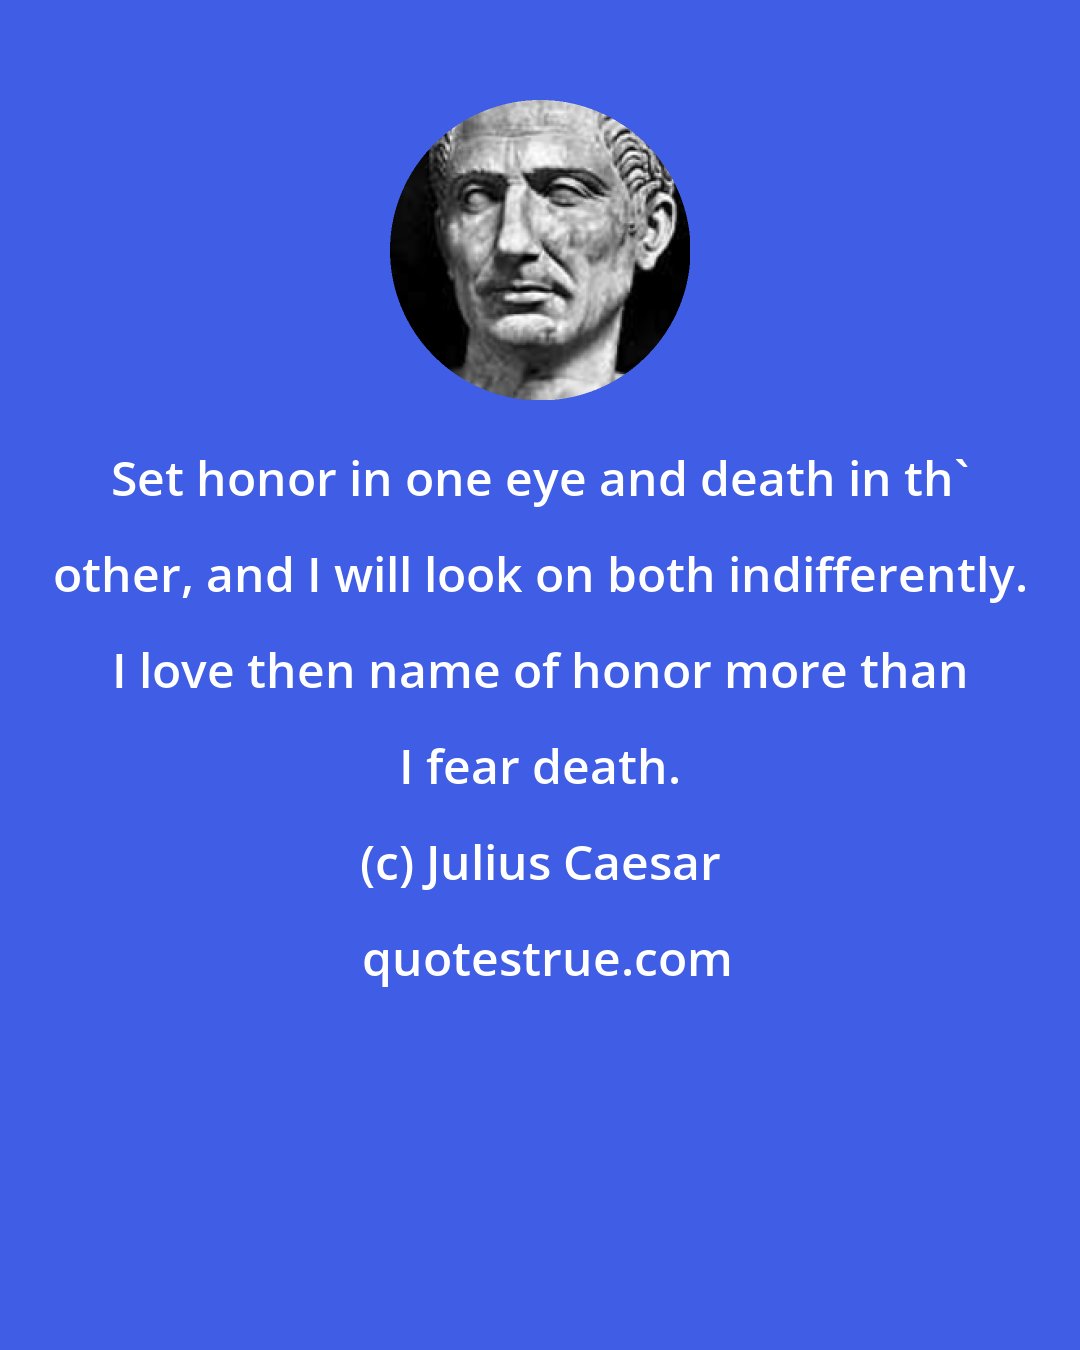 Julius Caesar: Set honor in one eye and death in th' other, and I will look on both indifferently. I love then name of honor more than I fear death.